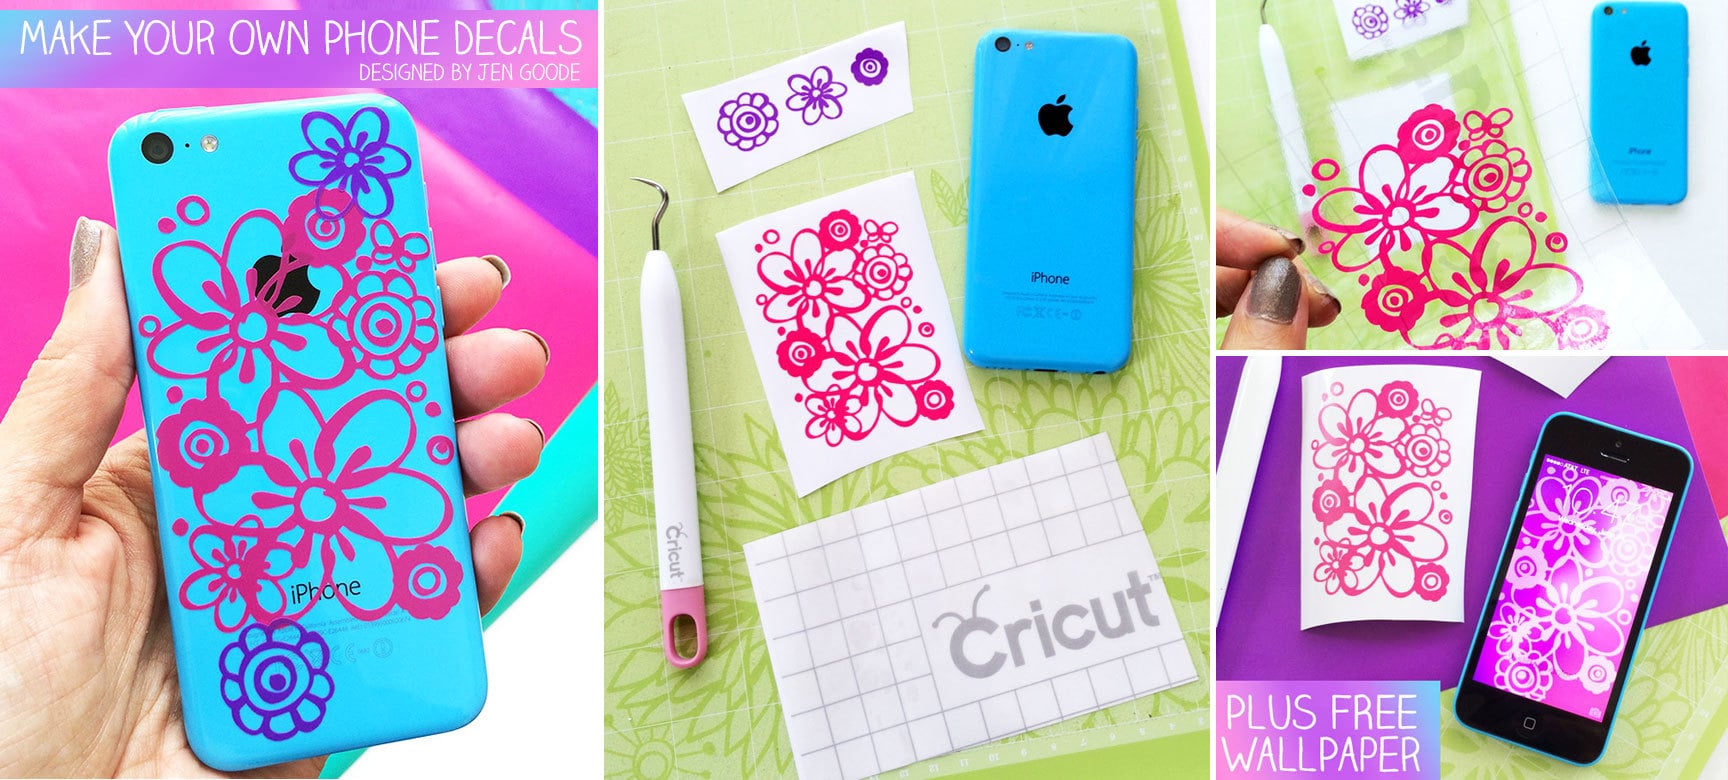 Download Make iPhone Decals with Cricut Plus Free Floral iPhone ...